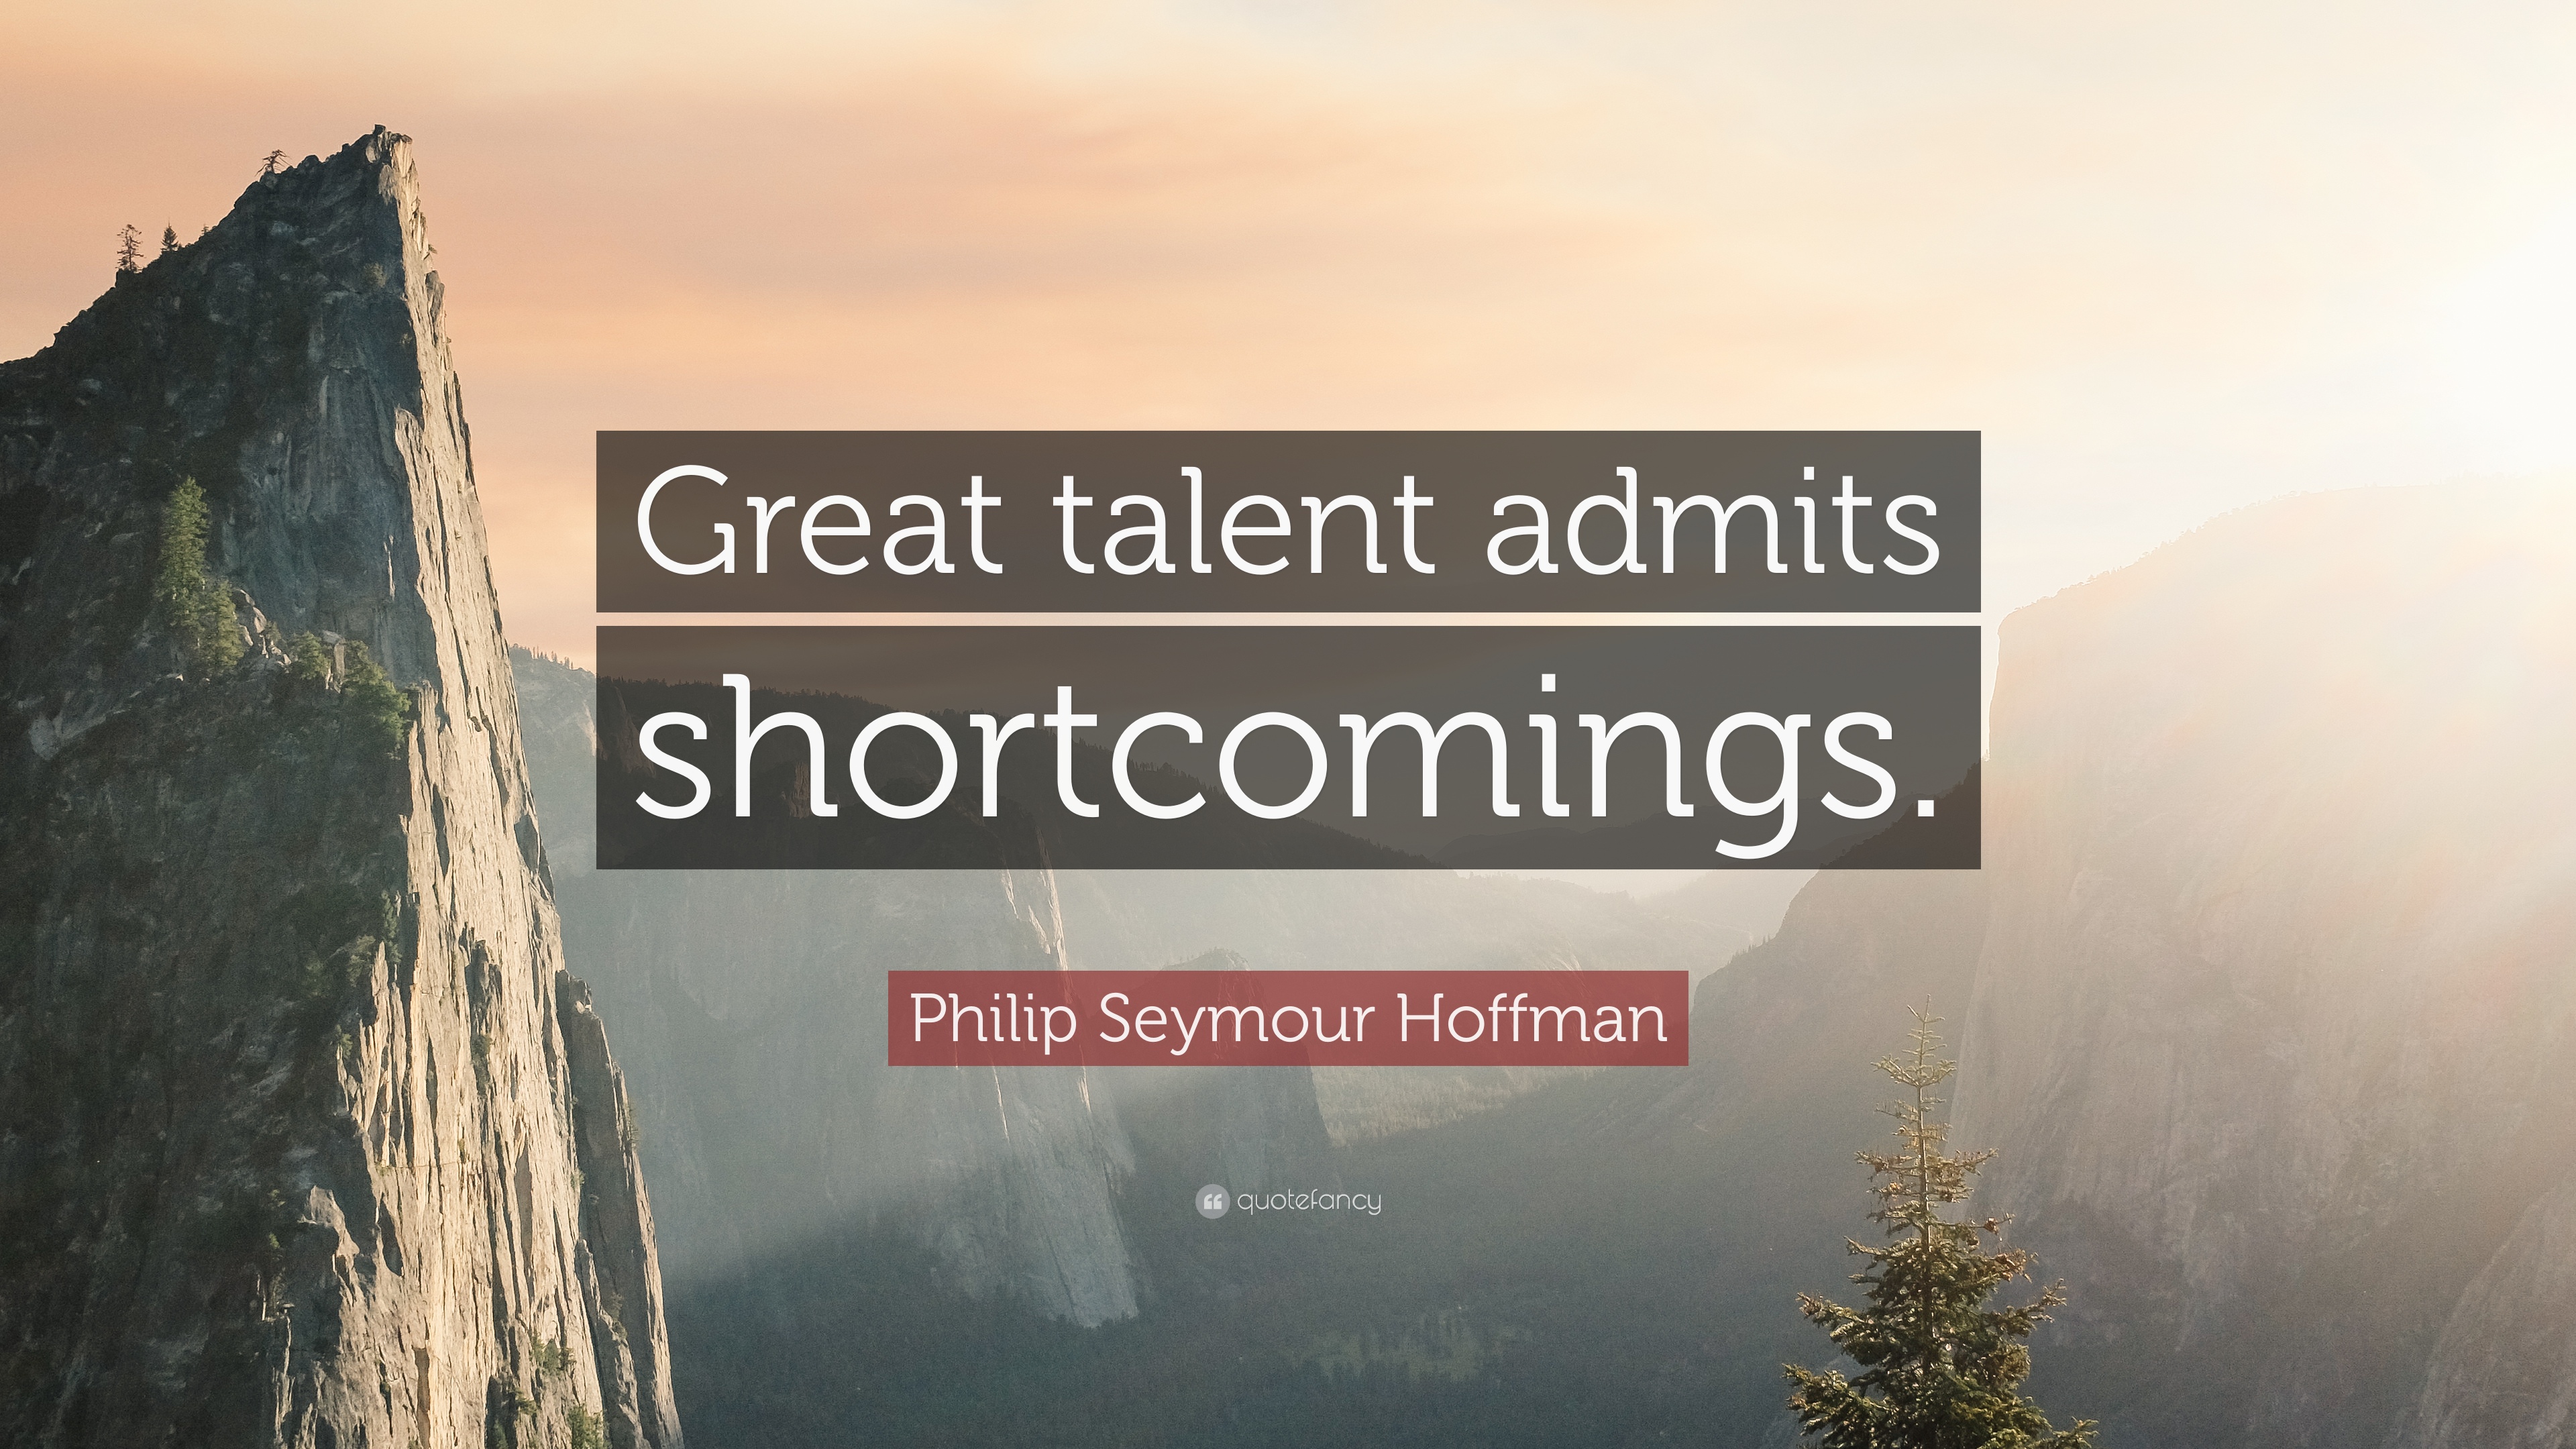 Philip Seymour Hoffman Quote: “Great talent admits shortcomings.” 7